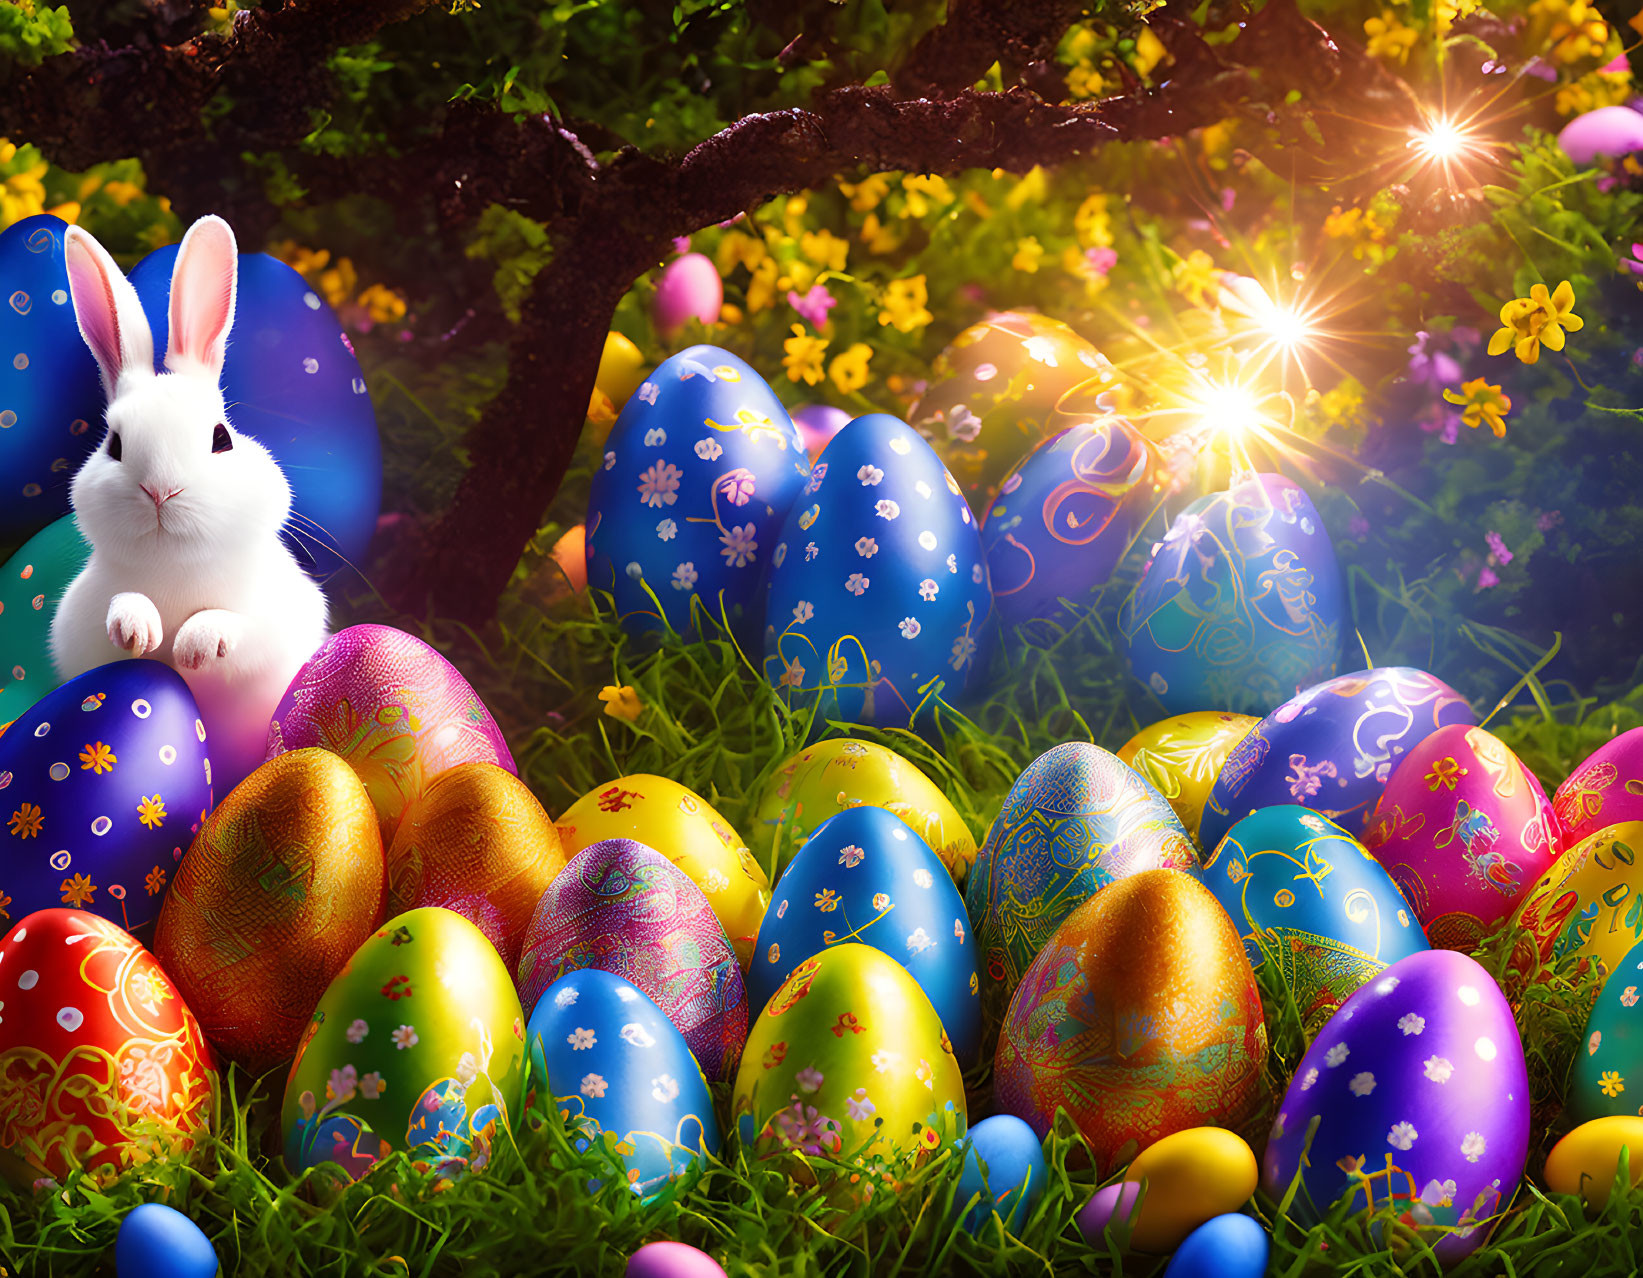 White Rabbit Surrounded by Easter Eggs in Vibrant Spring Setting